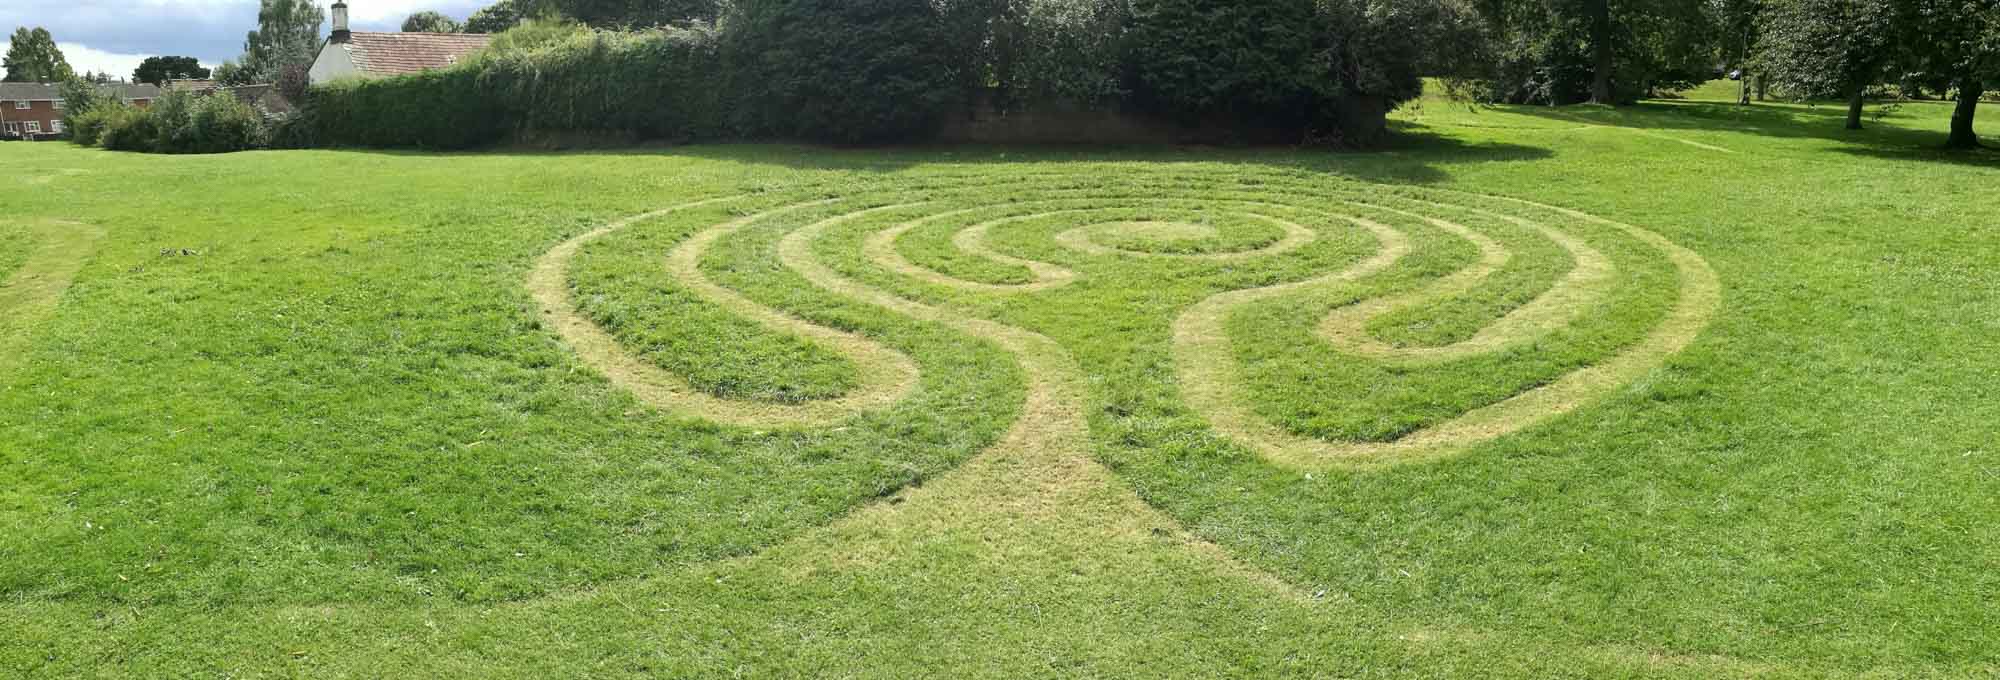 Getting Lost in the Labyrinth at Lyngford Park